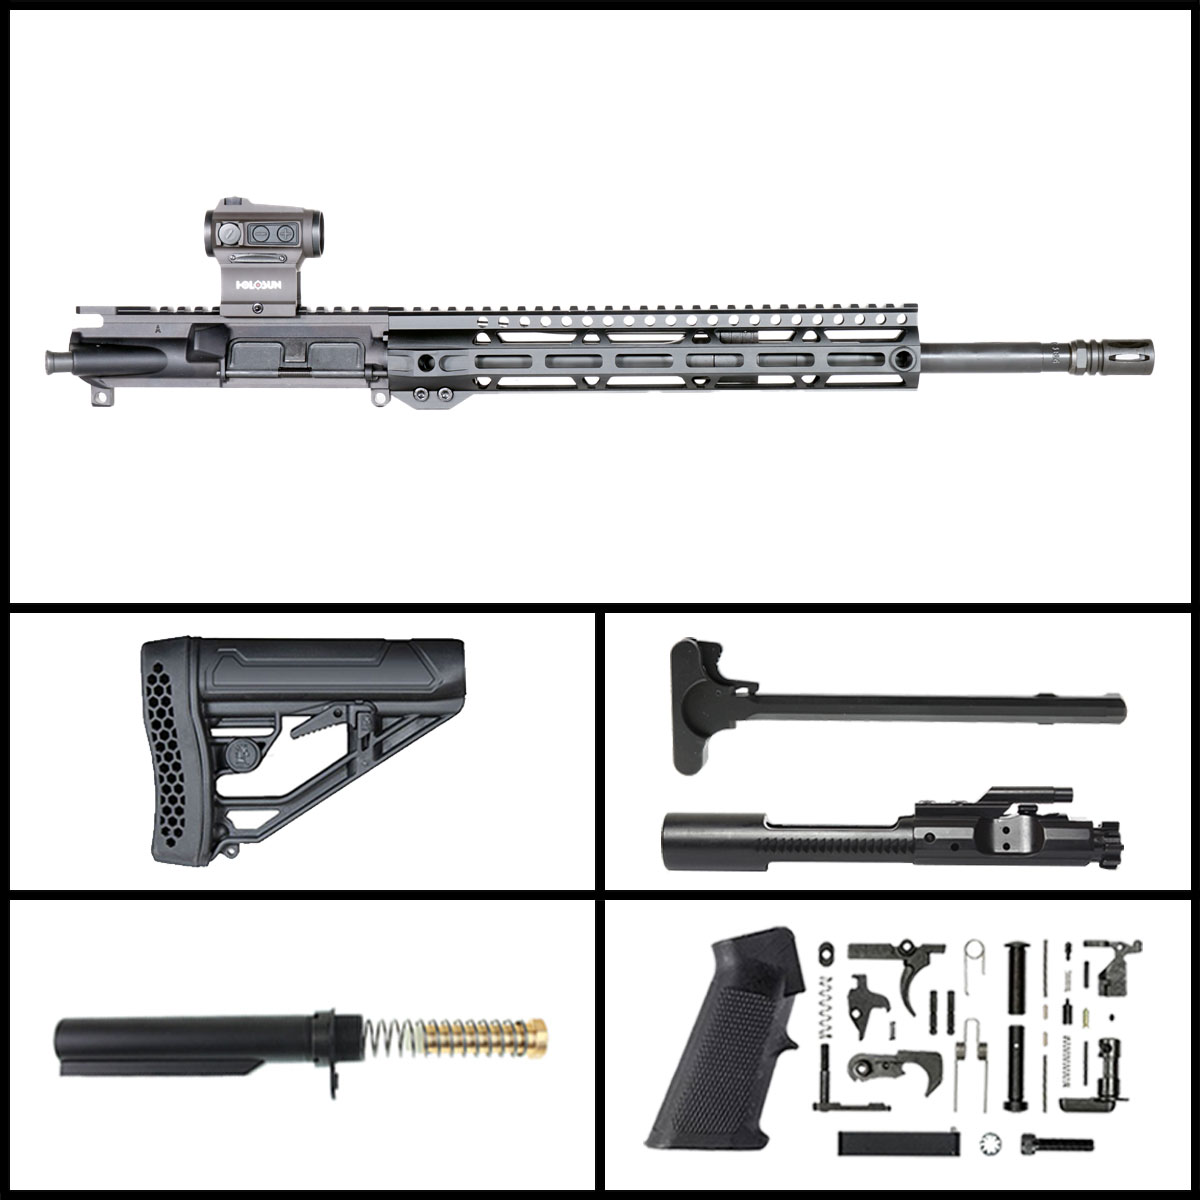 Davidson Defense 'Legend's Fate w/ Holosun Micro Red Dot' 16-inch AR-15 .350 Legend Phosphate Rifle Full Build Kit